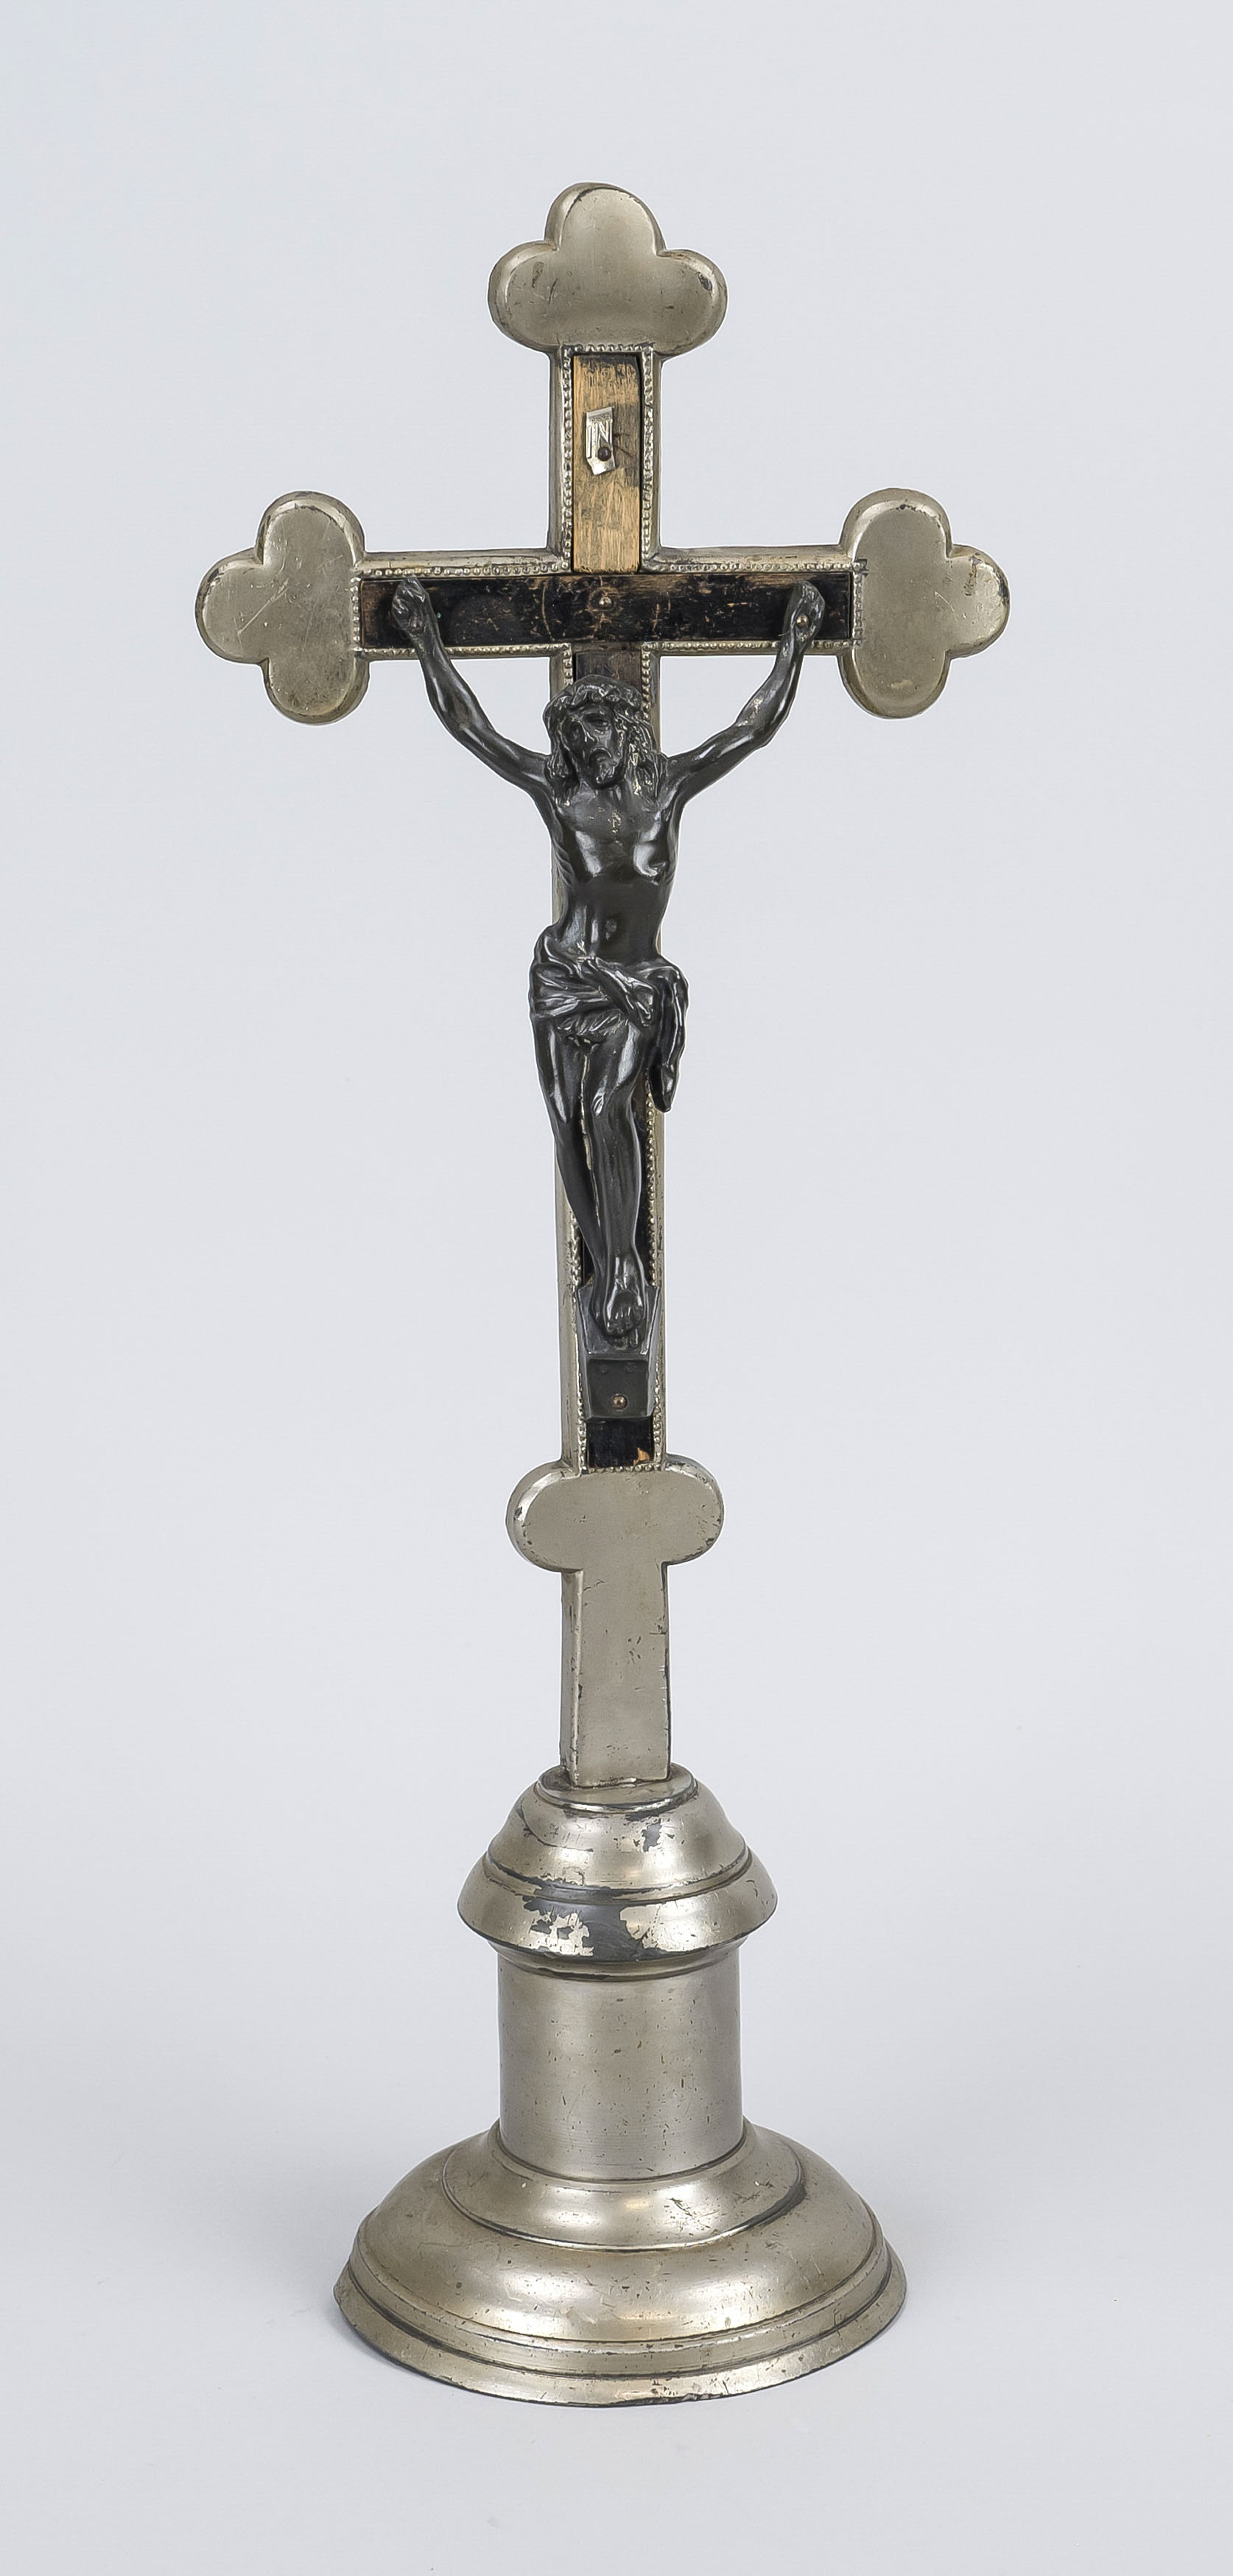 Crucifix, 19th century, multi-colored cast metal and wood, three-nail type, h. 47 cm